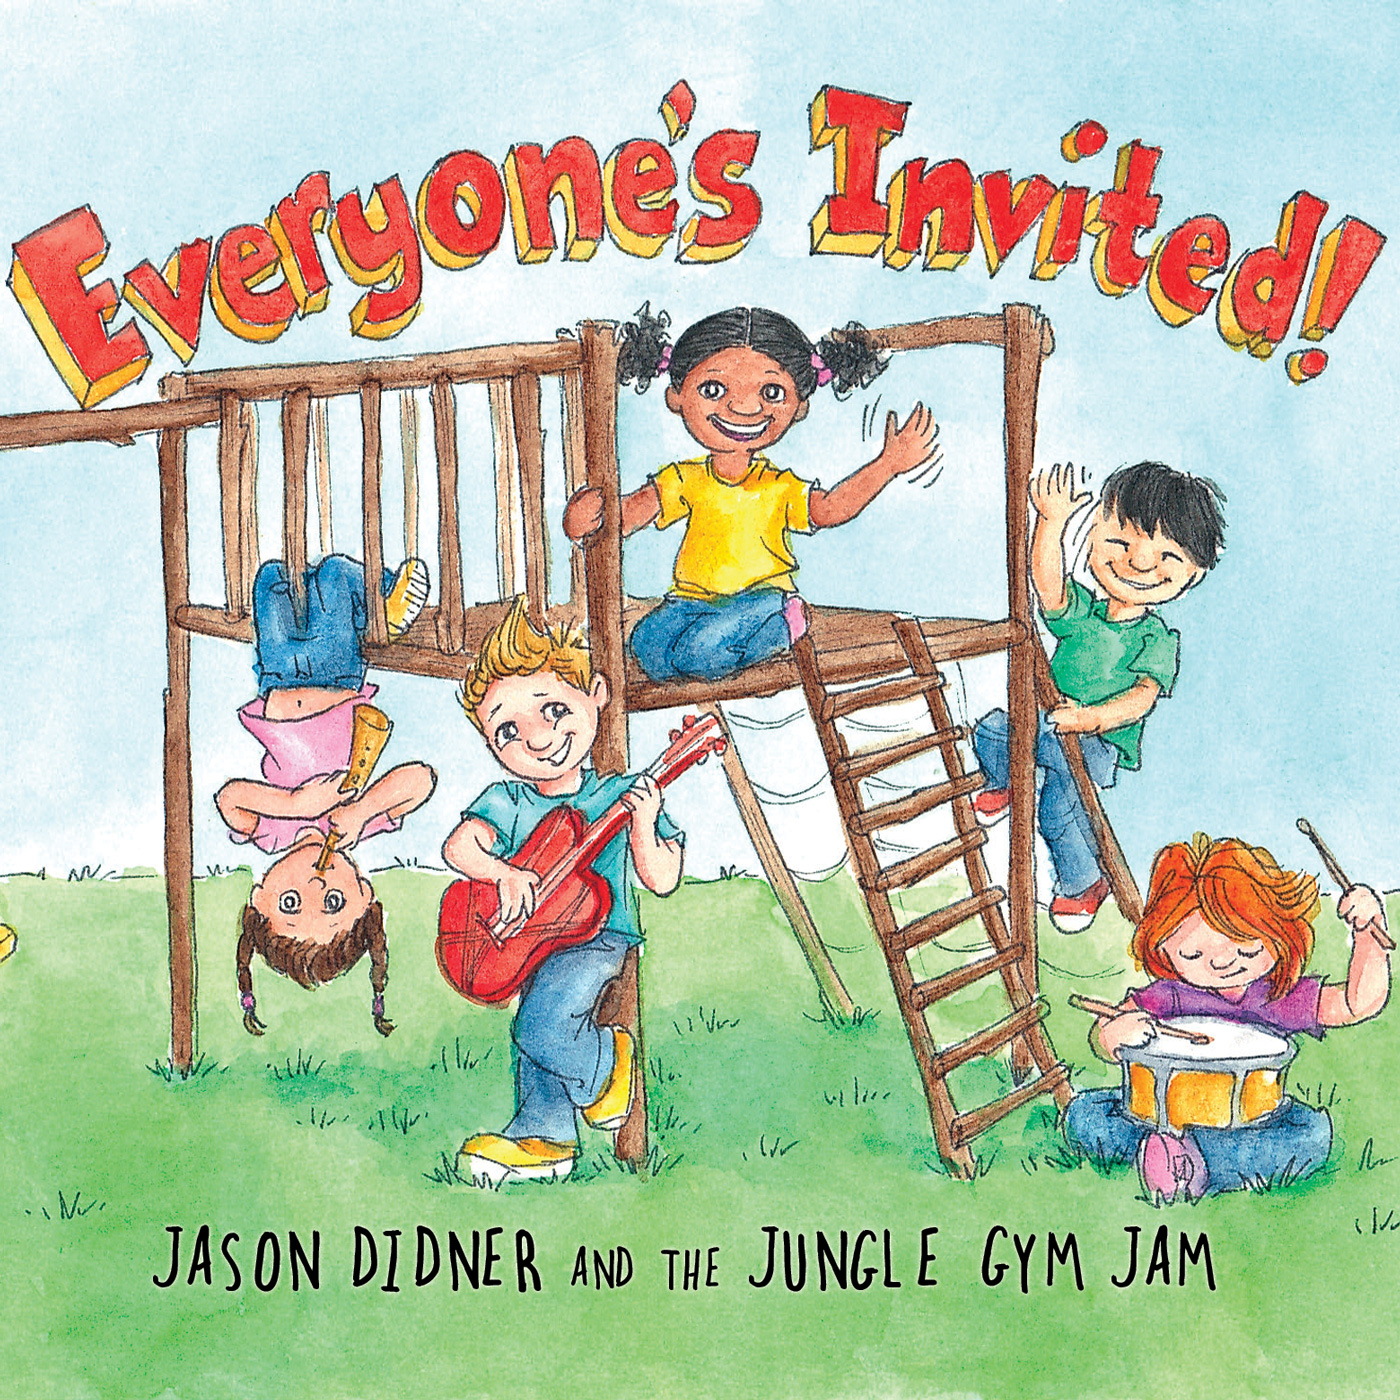 Everyone's Invited! album cover artwork - Jason Didner and the Jungle Gym Jam - illustrated by Melissa Bailey